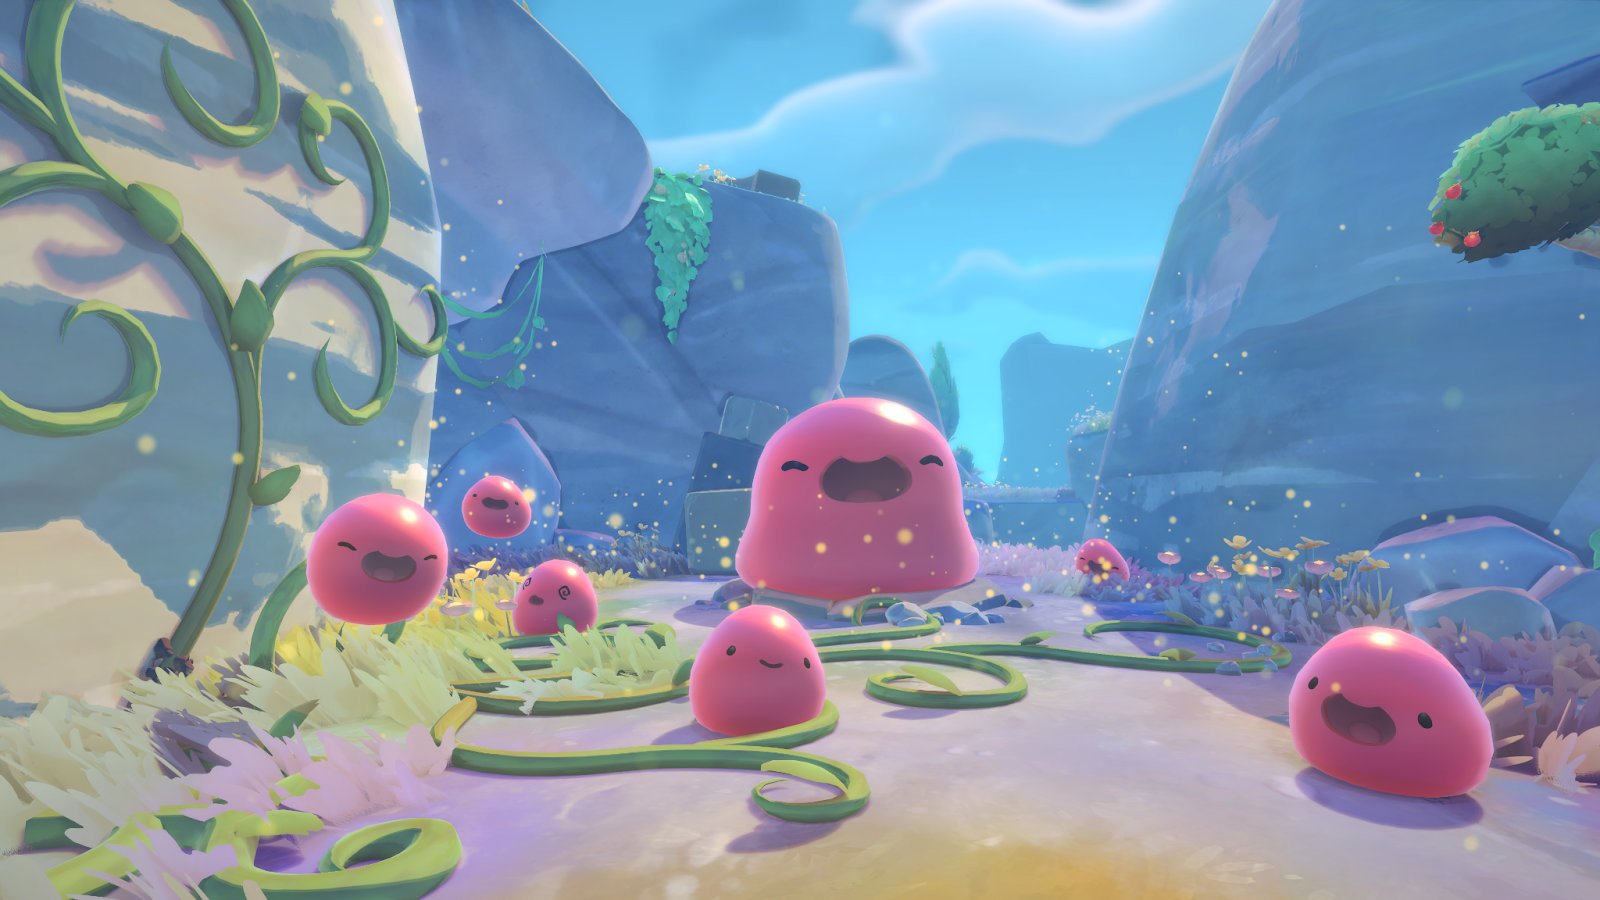 Steam Community :: Guide :: Ultimate Slime Rancher Map (Including